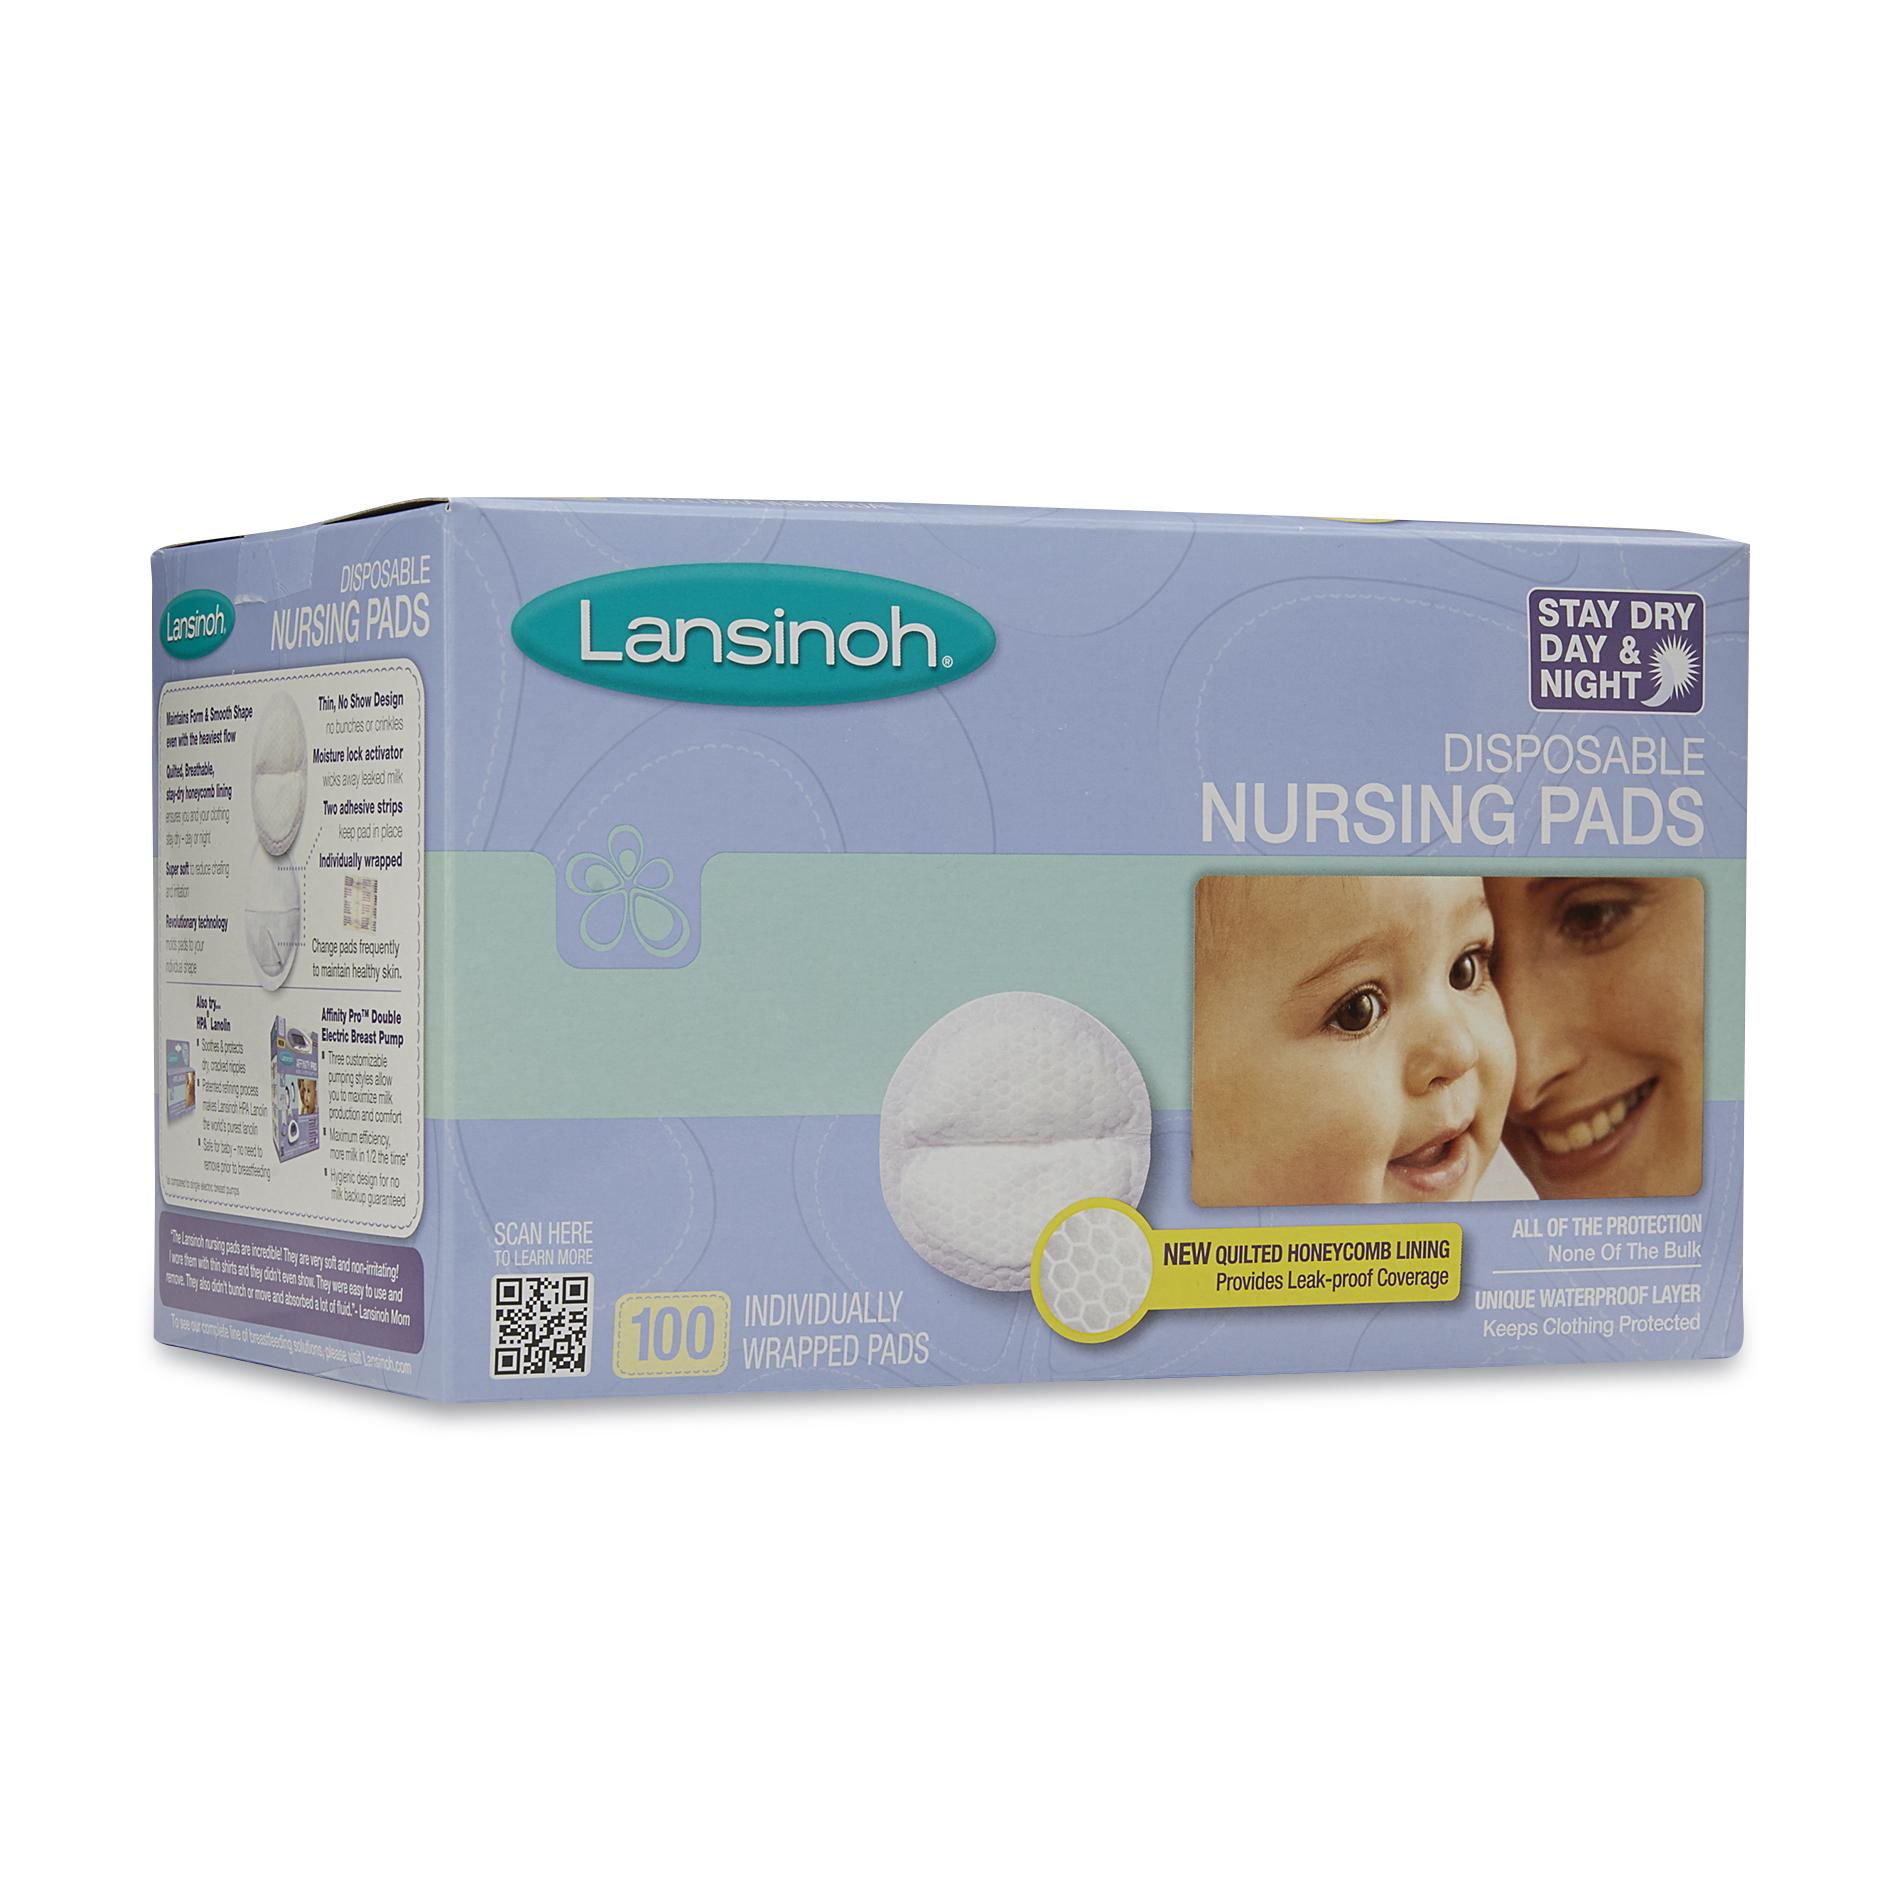 Lansinoh Stay Dry Disposable Nursing Pads for Breastfeeding, 100 Count 